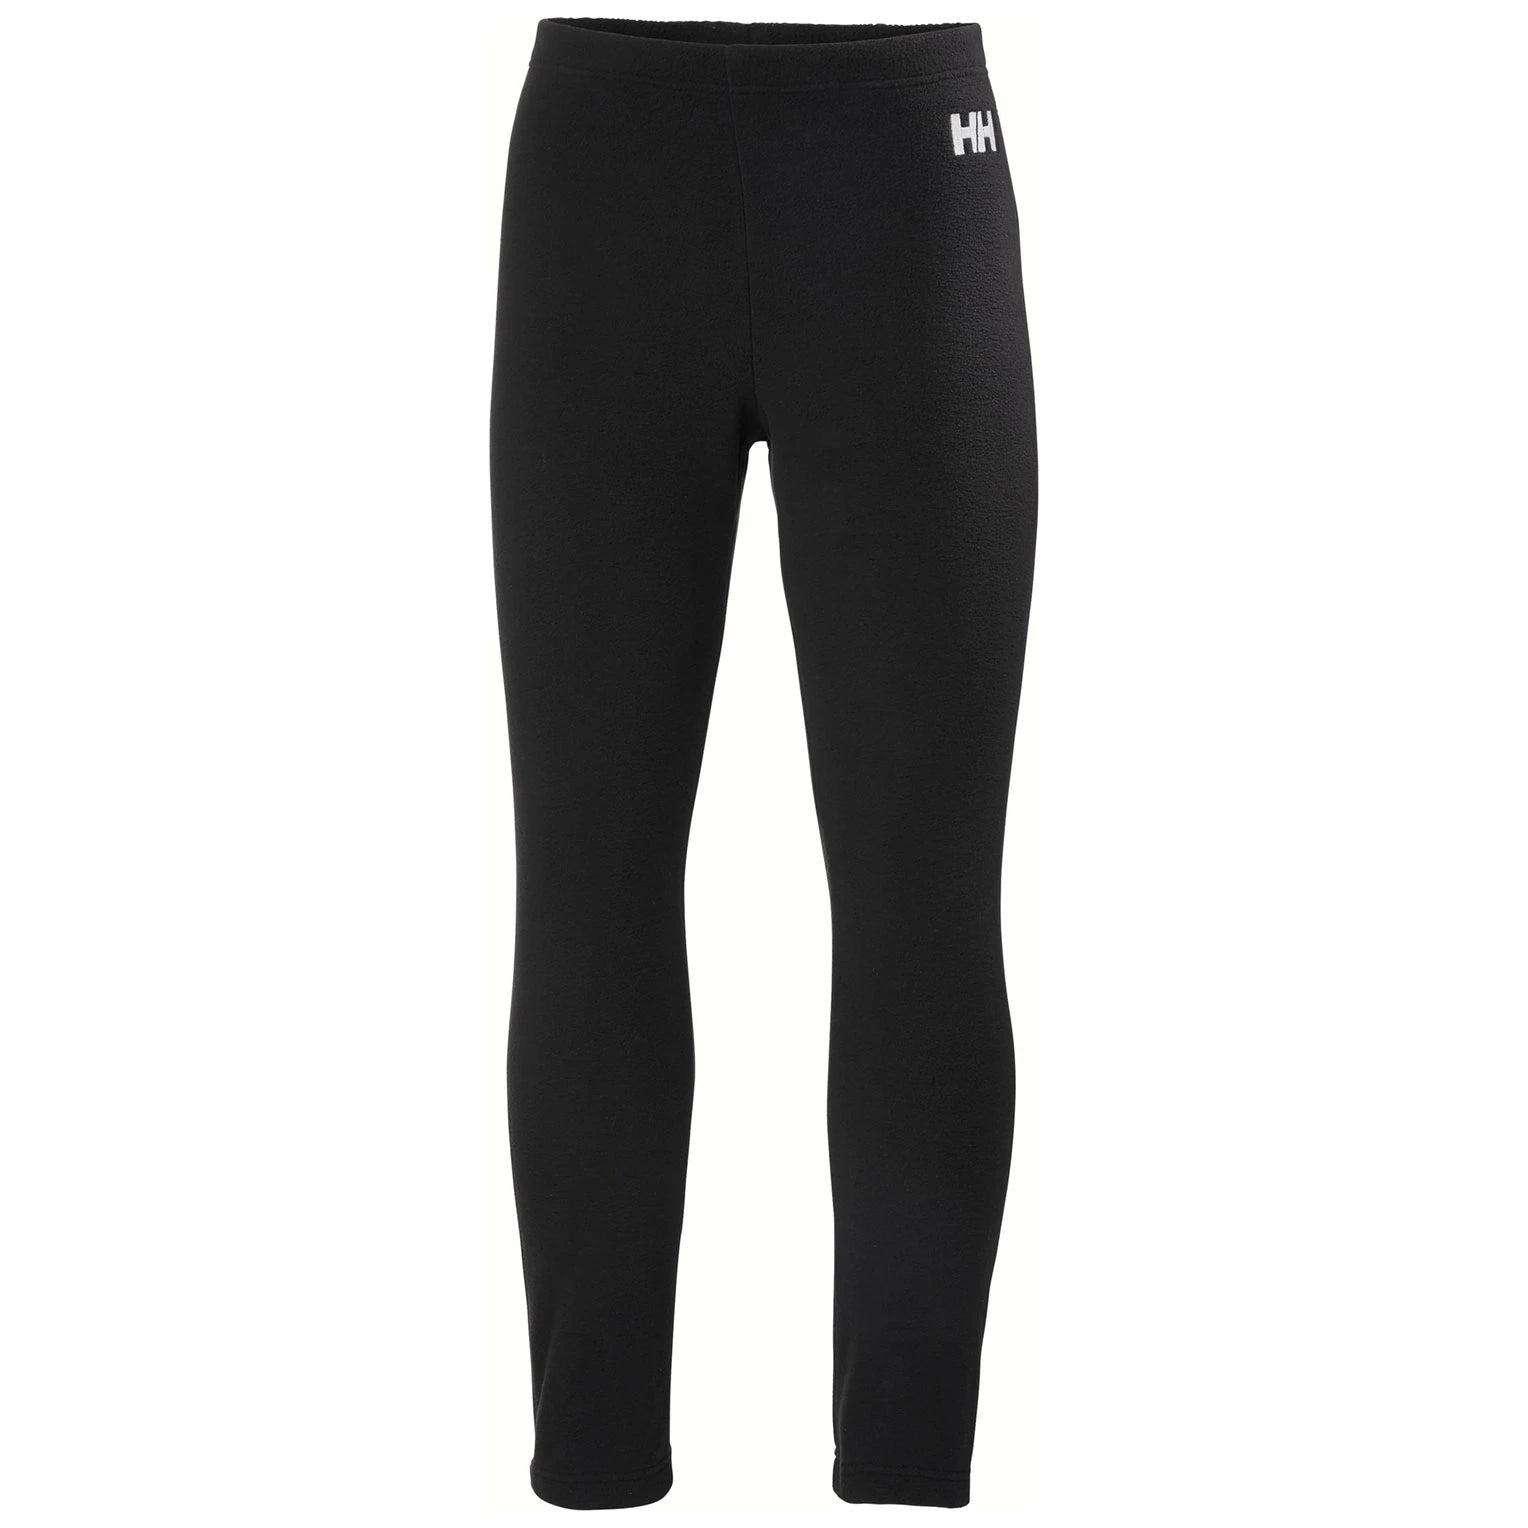 Helly Hansen Junior Daybreaker Tights: Active Comfort and Style